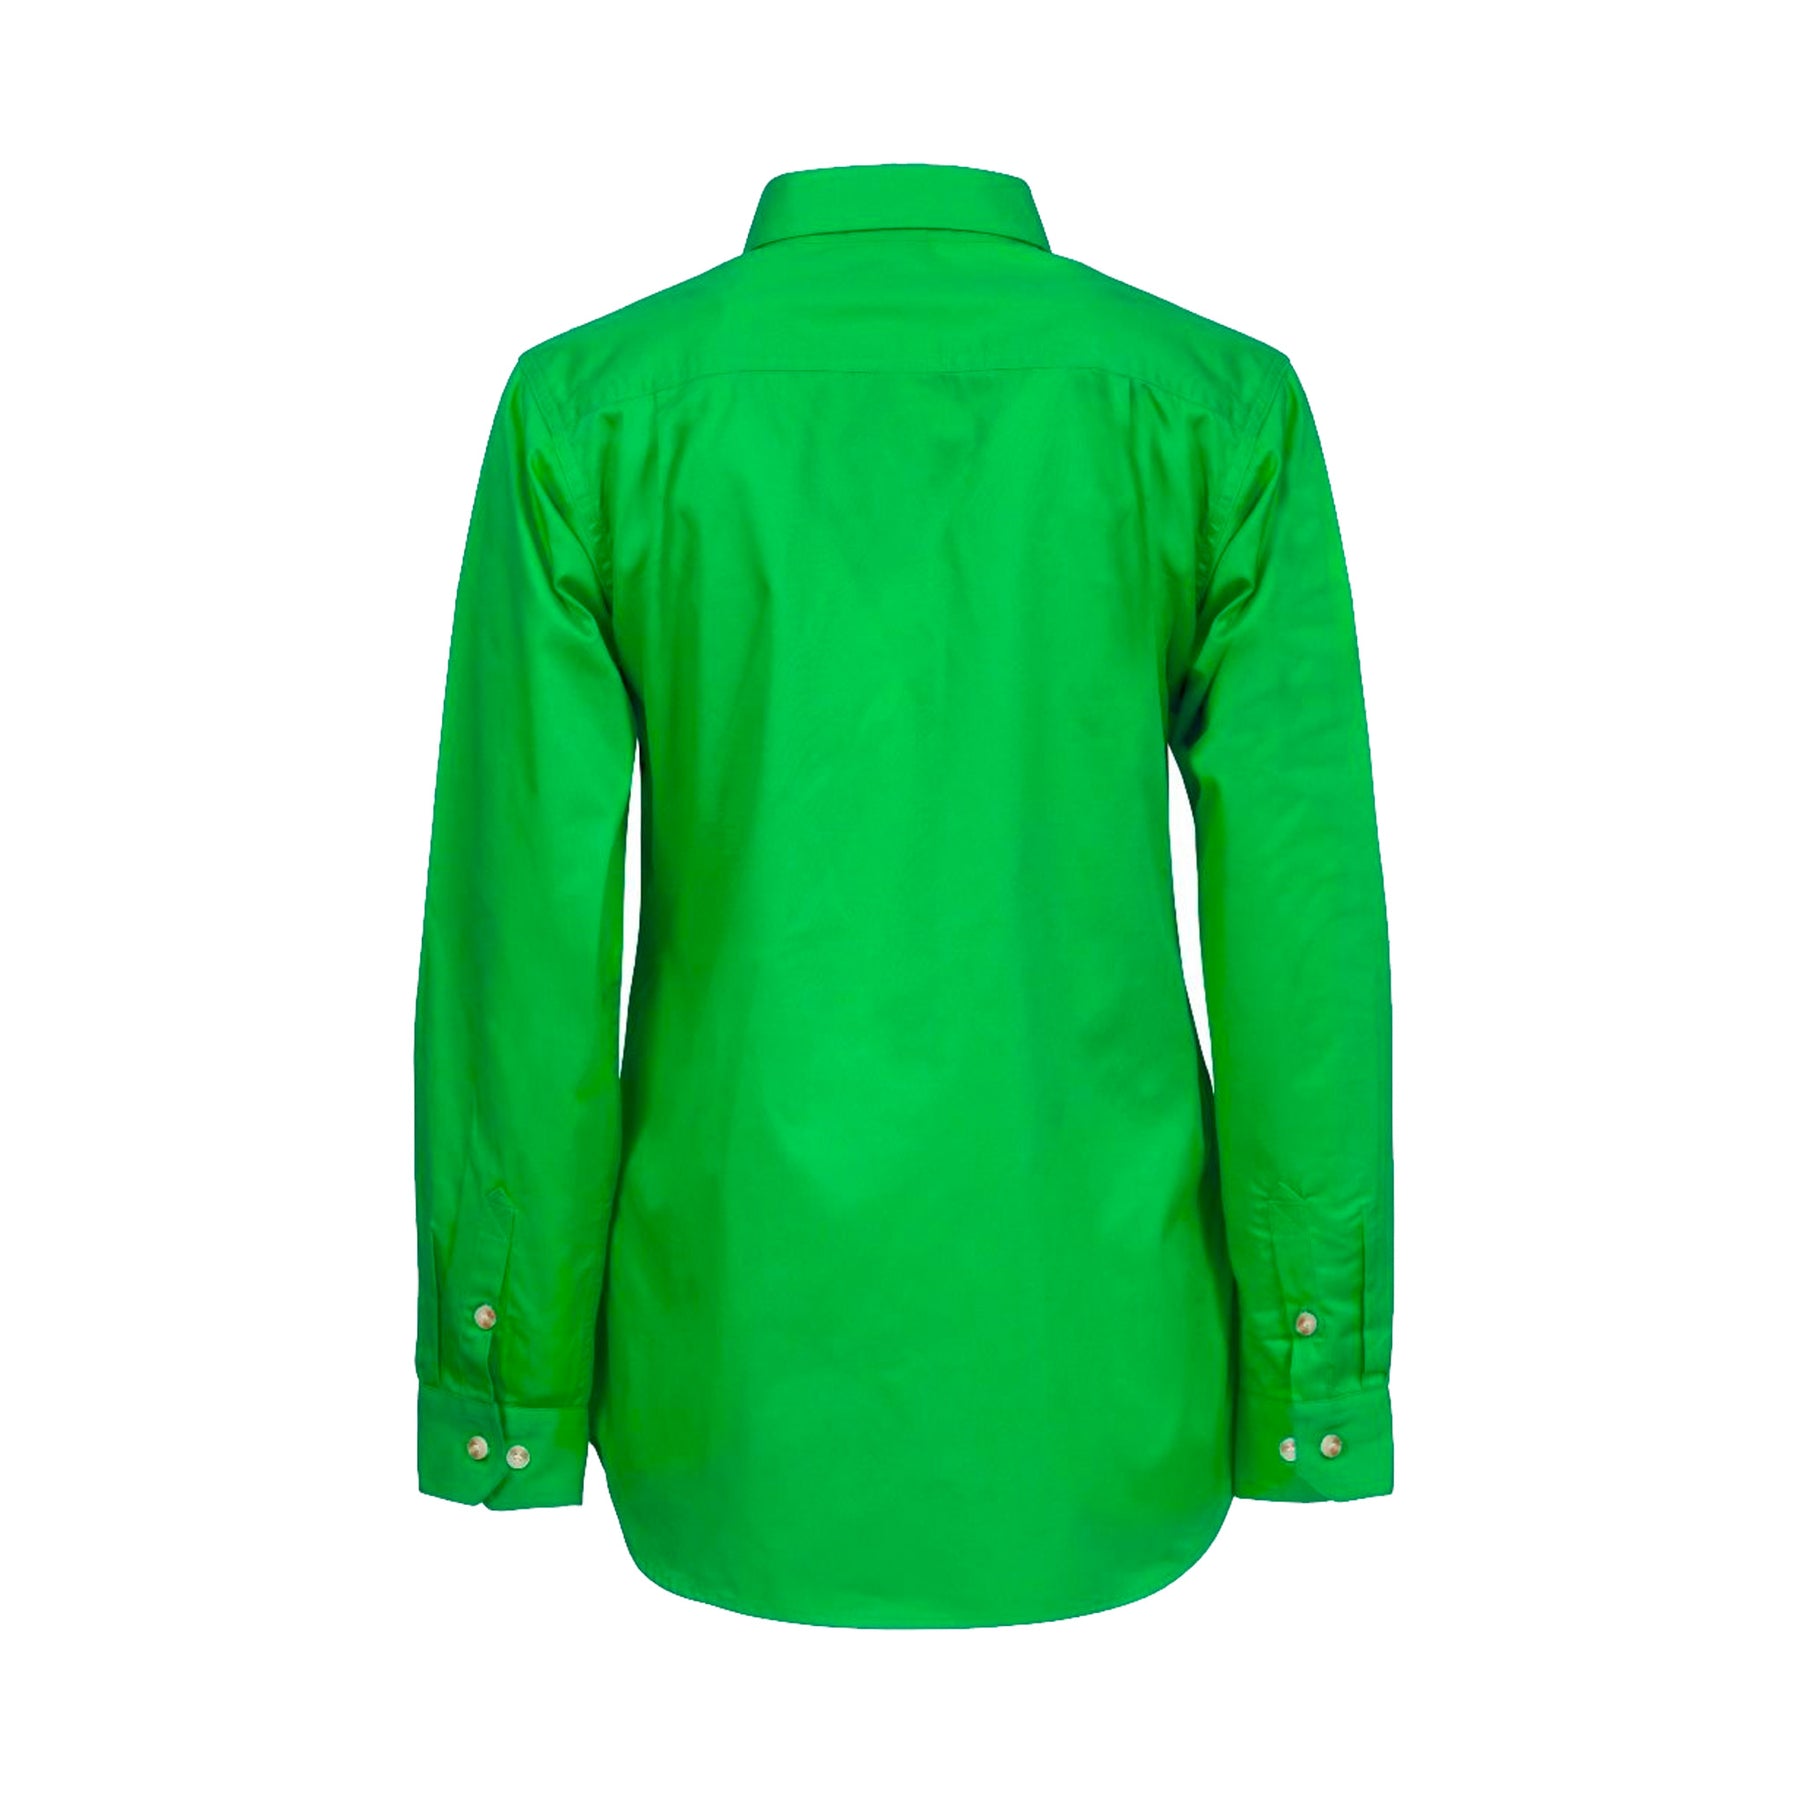 back of ladies long sleeve lightweight half placket shirt in electric green